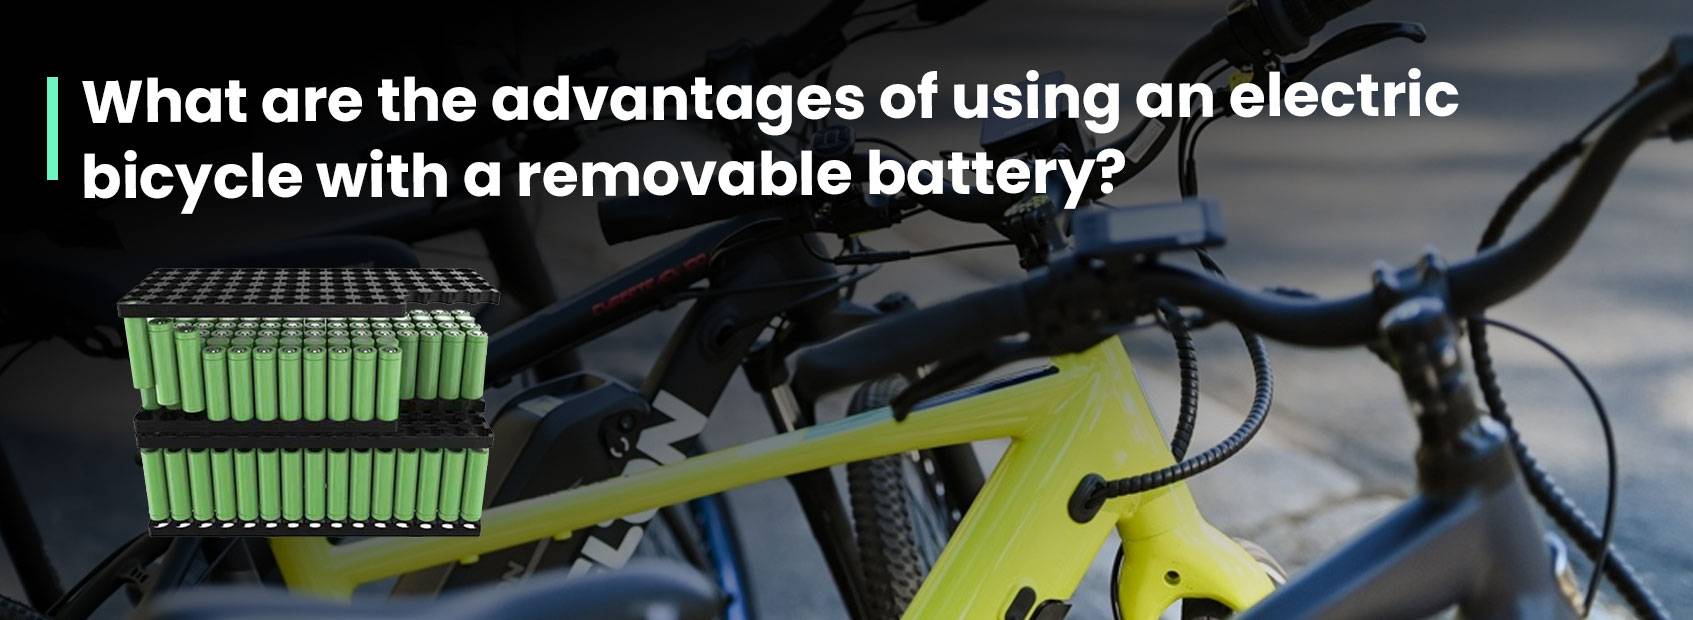 What are the advantages of using an electric bicycle with a removable battery?